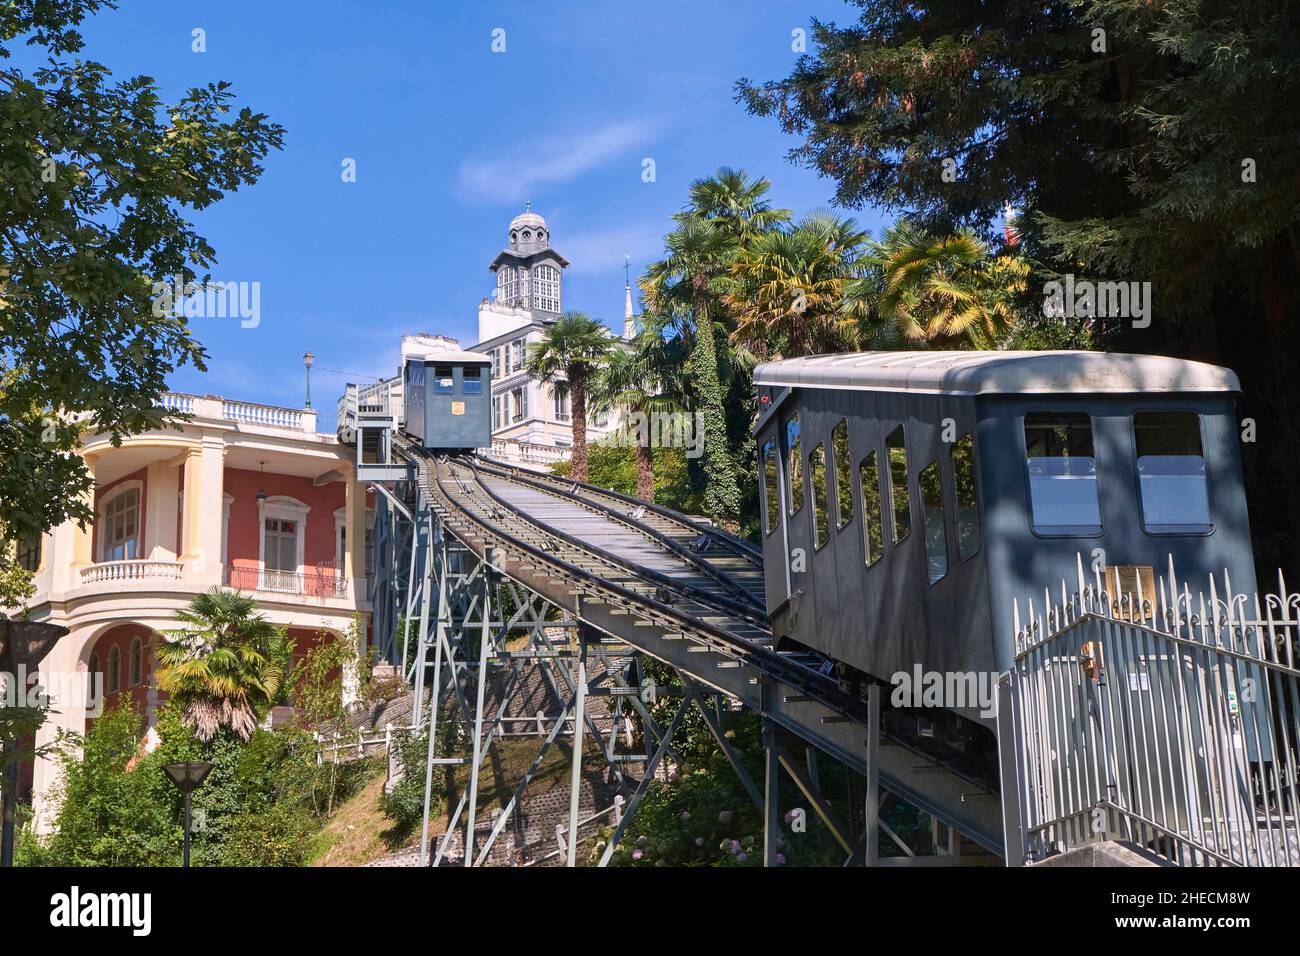 France, Pyrenees Atlantiques, Bearn, Pau, the funicular that connects the Boulevard des Pyr?n?es to the station Stock Photo